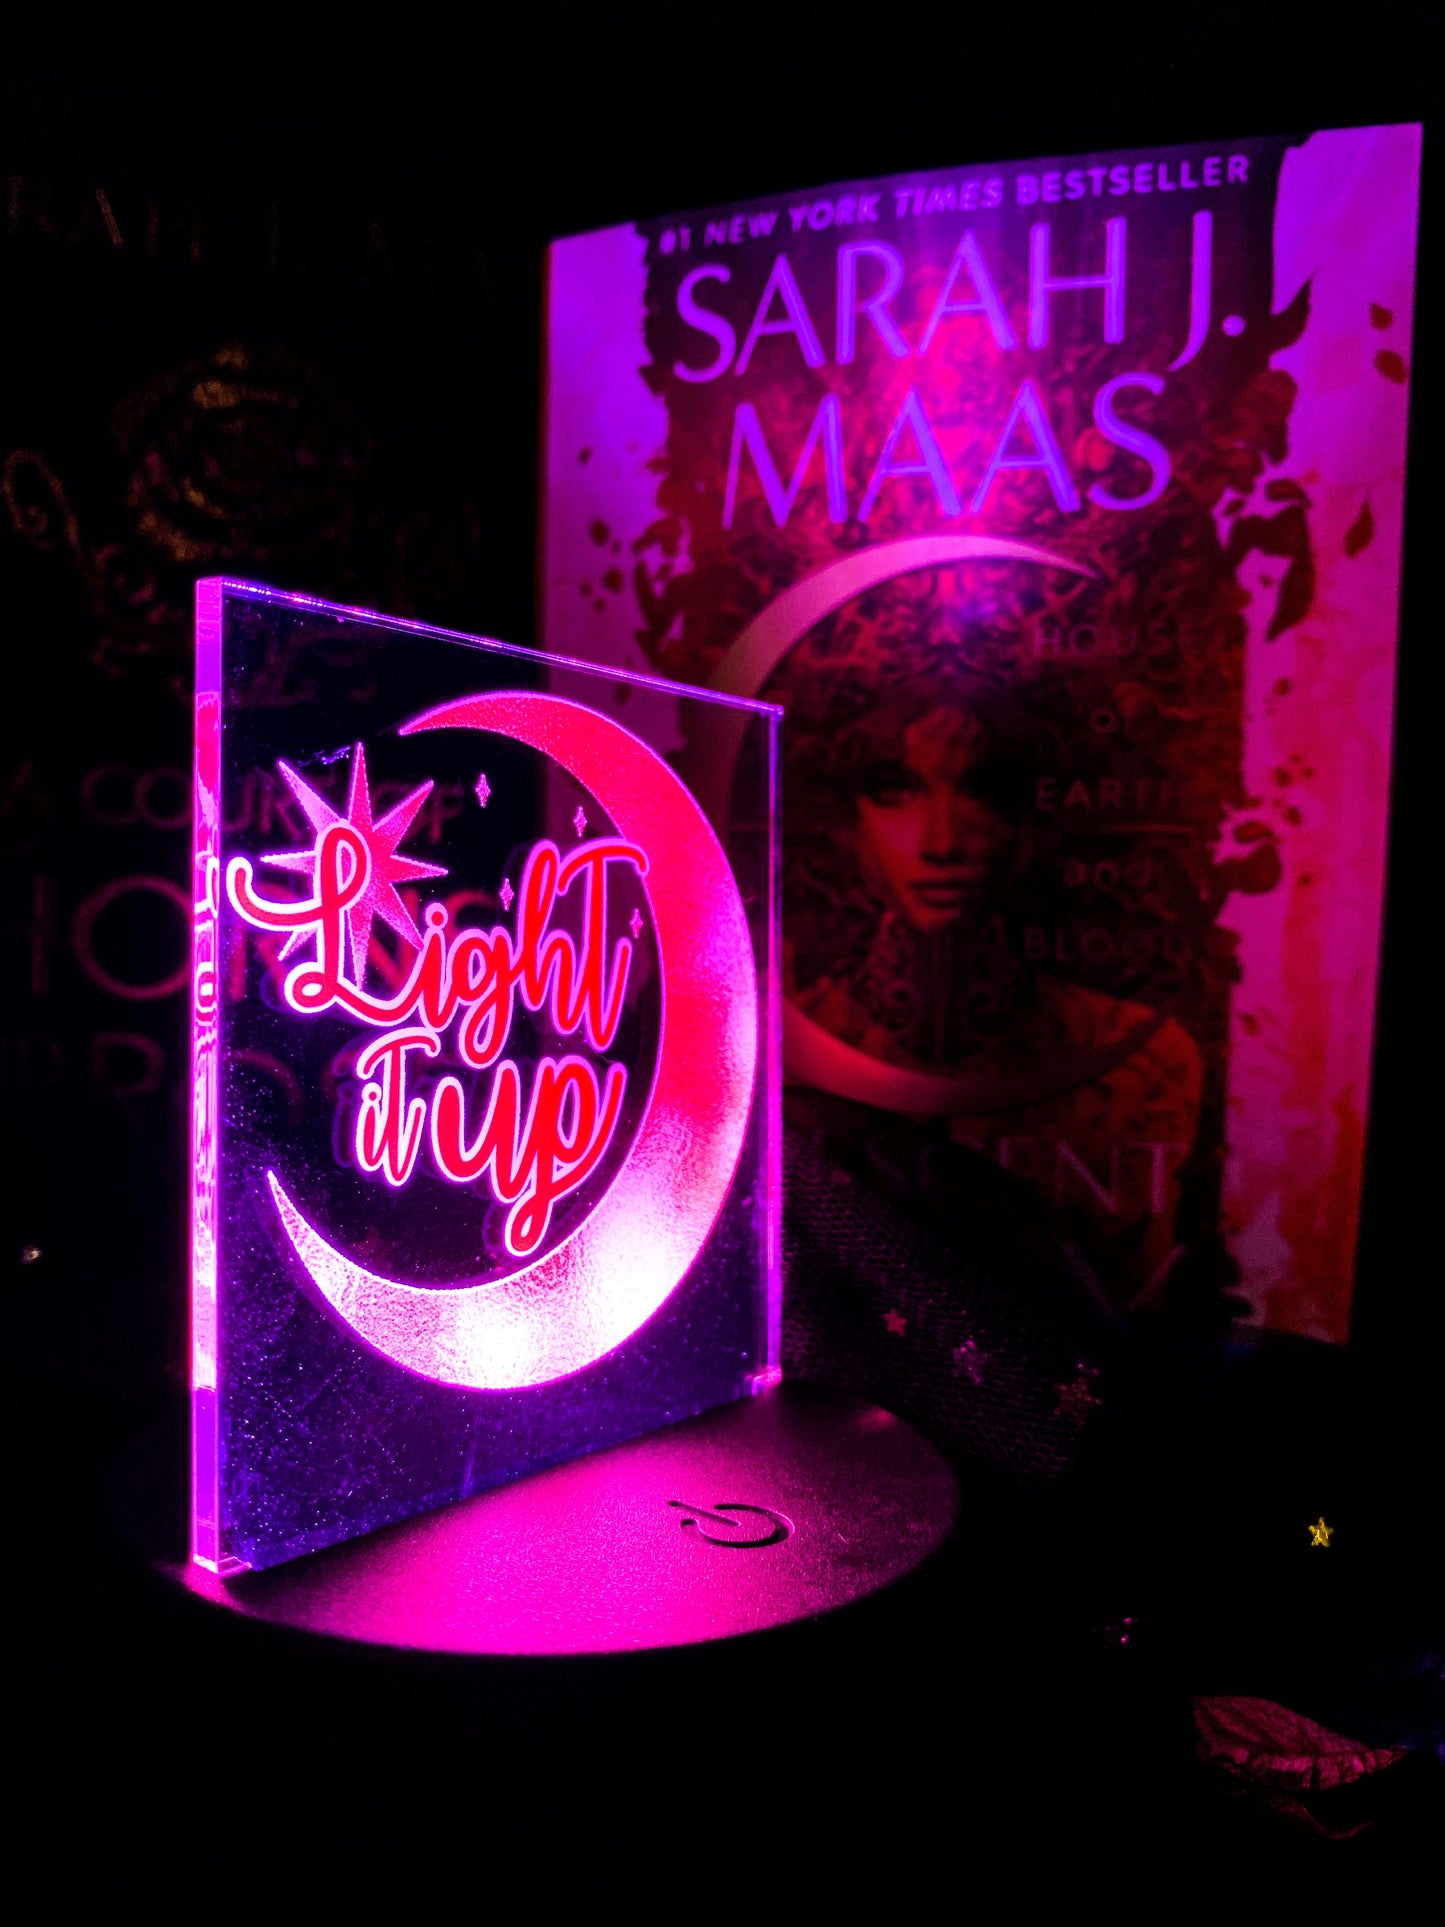 Light it up! - Light Up Base - Officially licensed by Sarah J. Maas